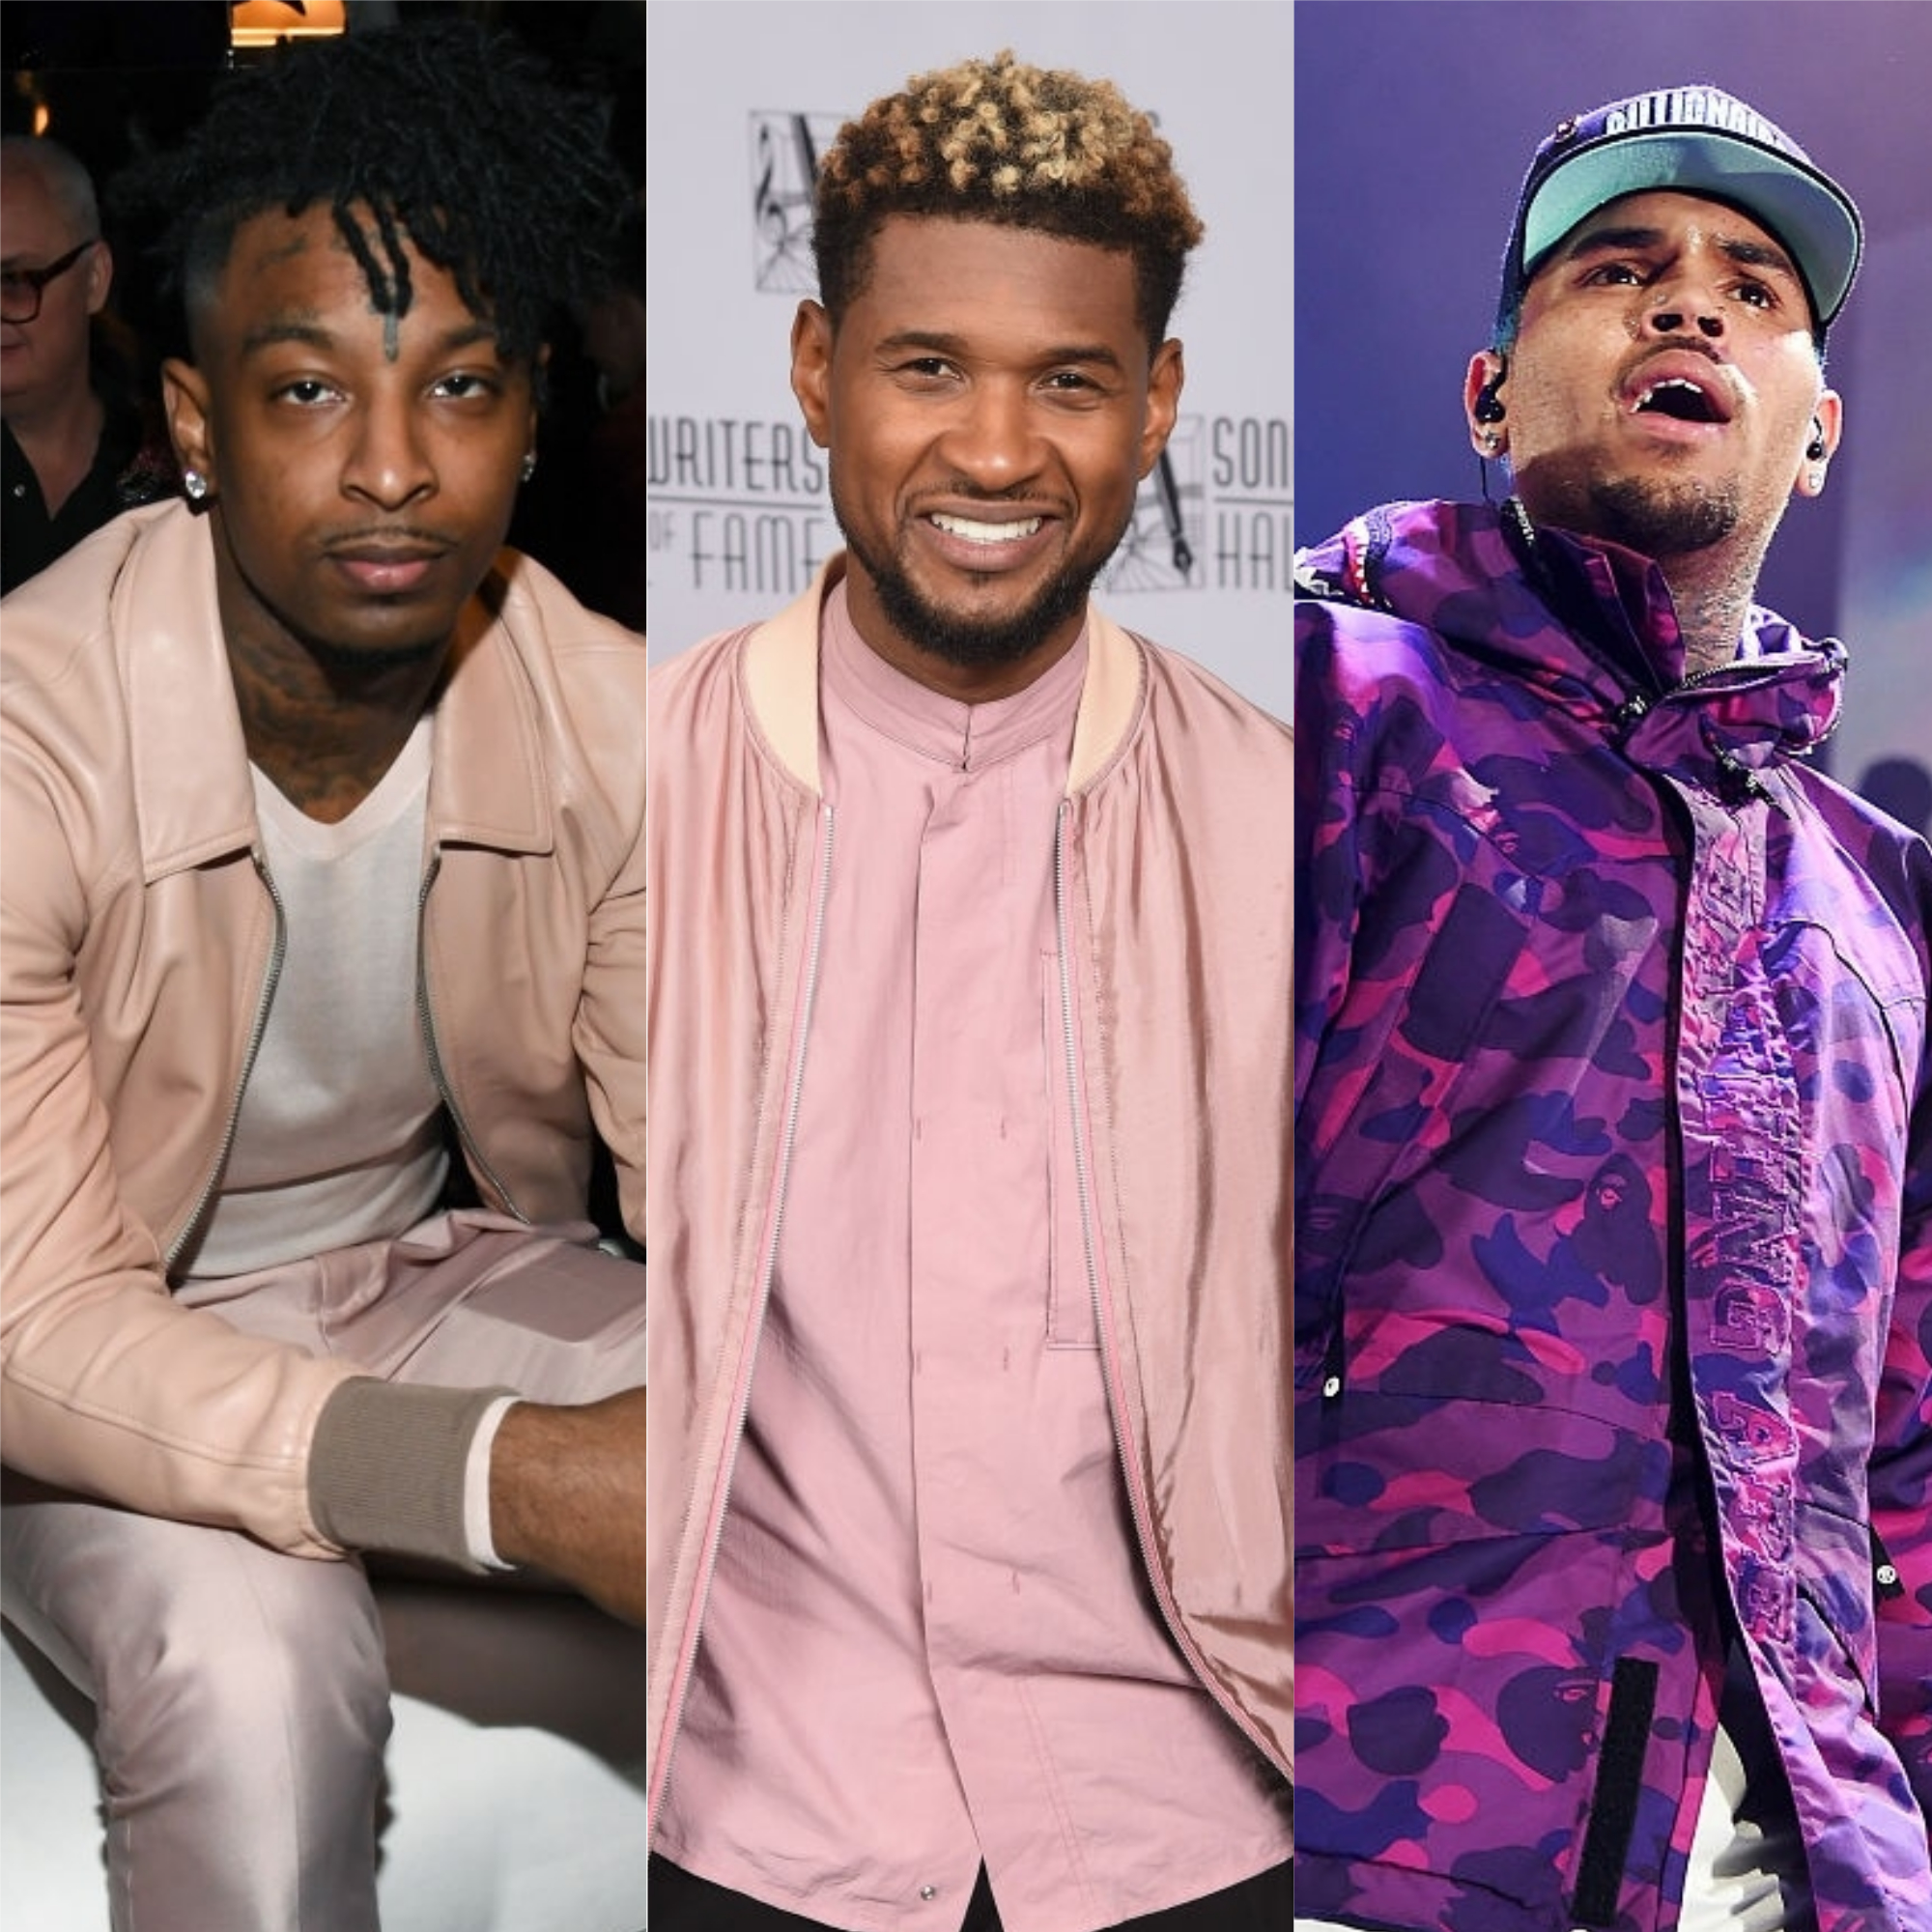 21 Savage and Chris Brown both have secured some Usher Bucks